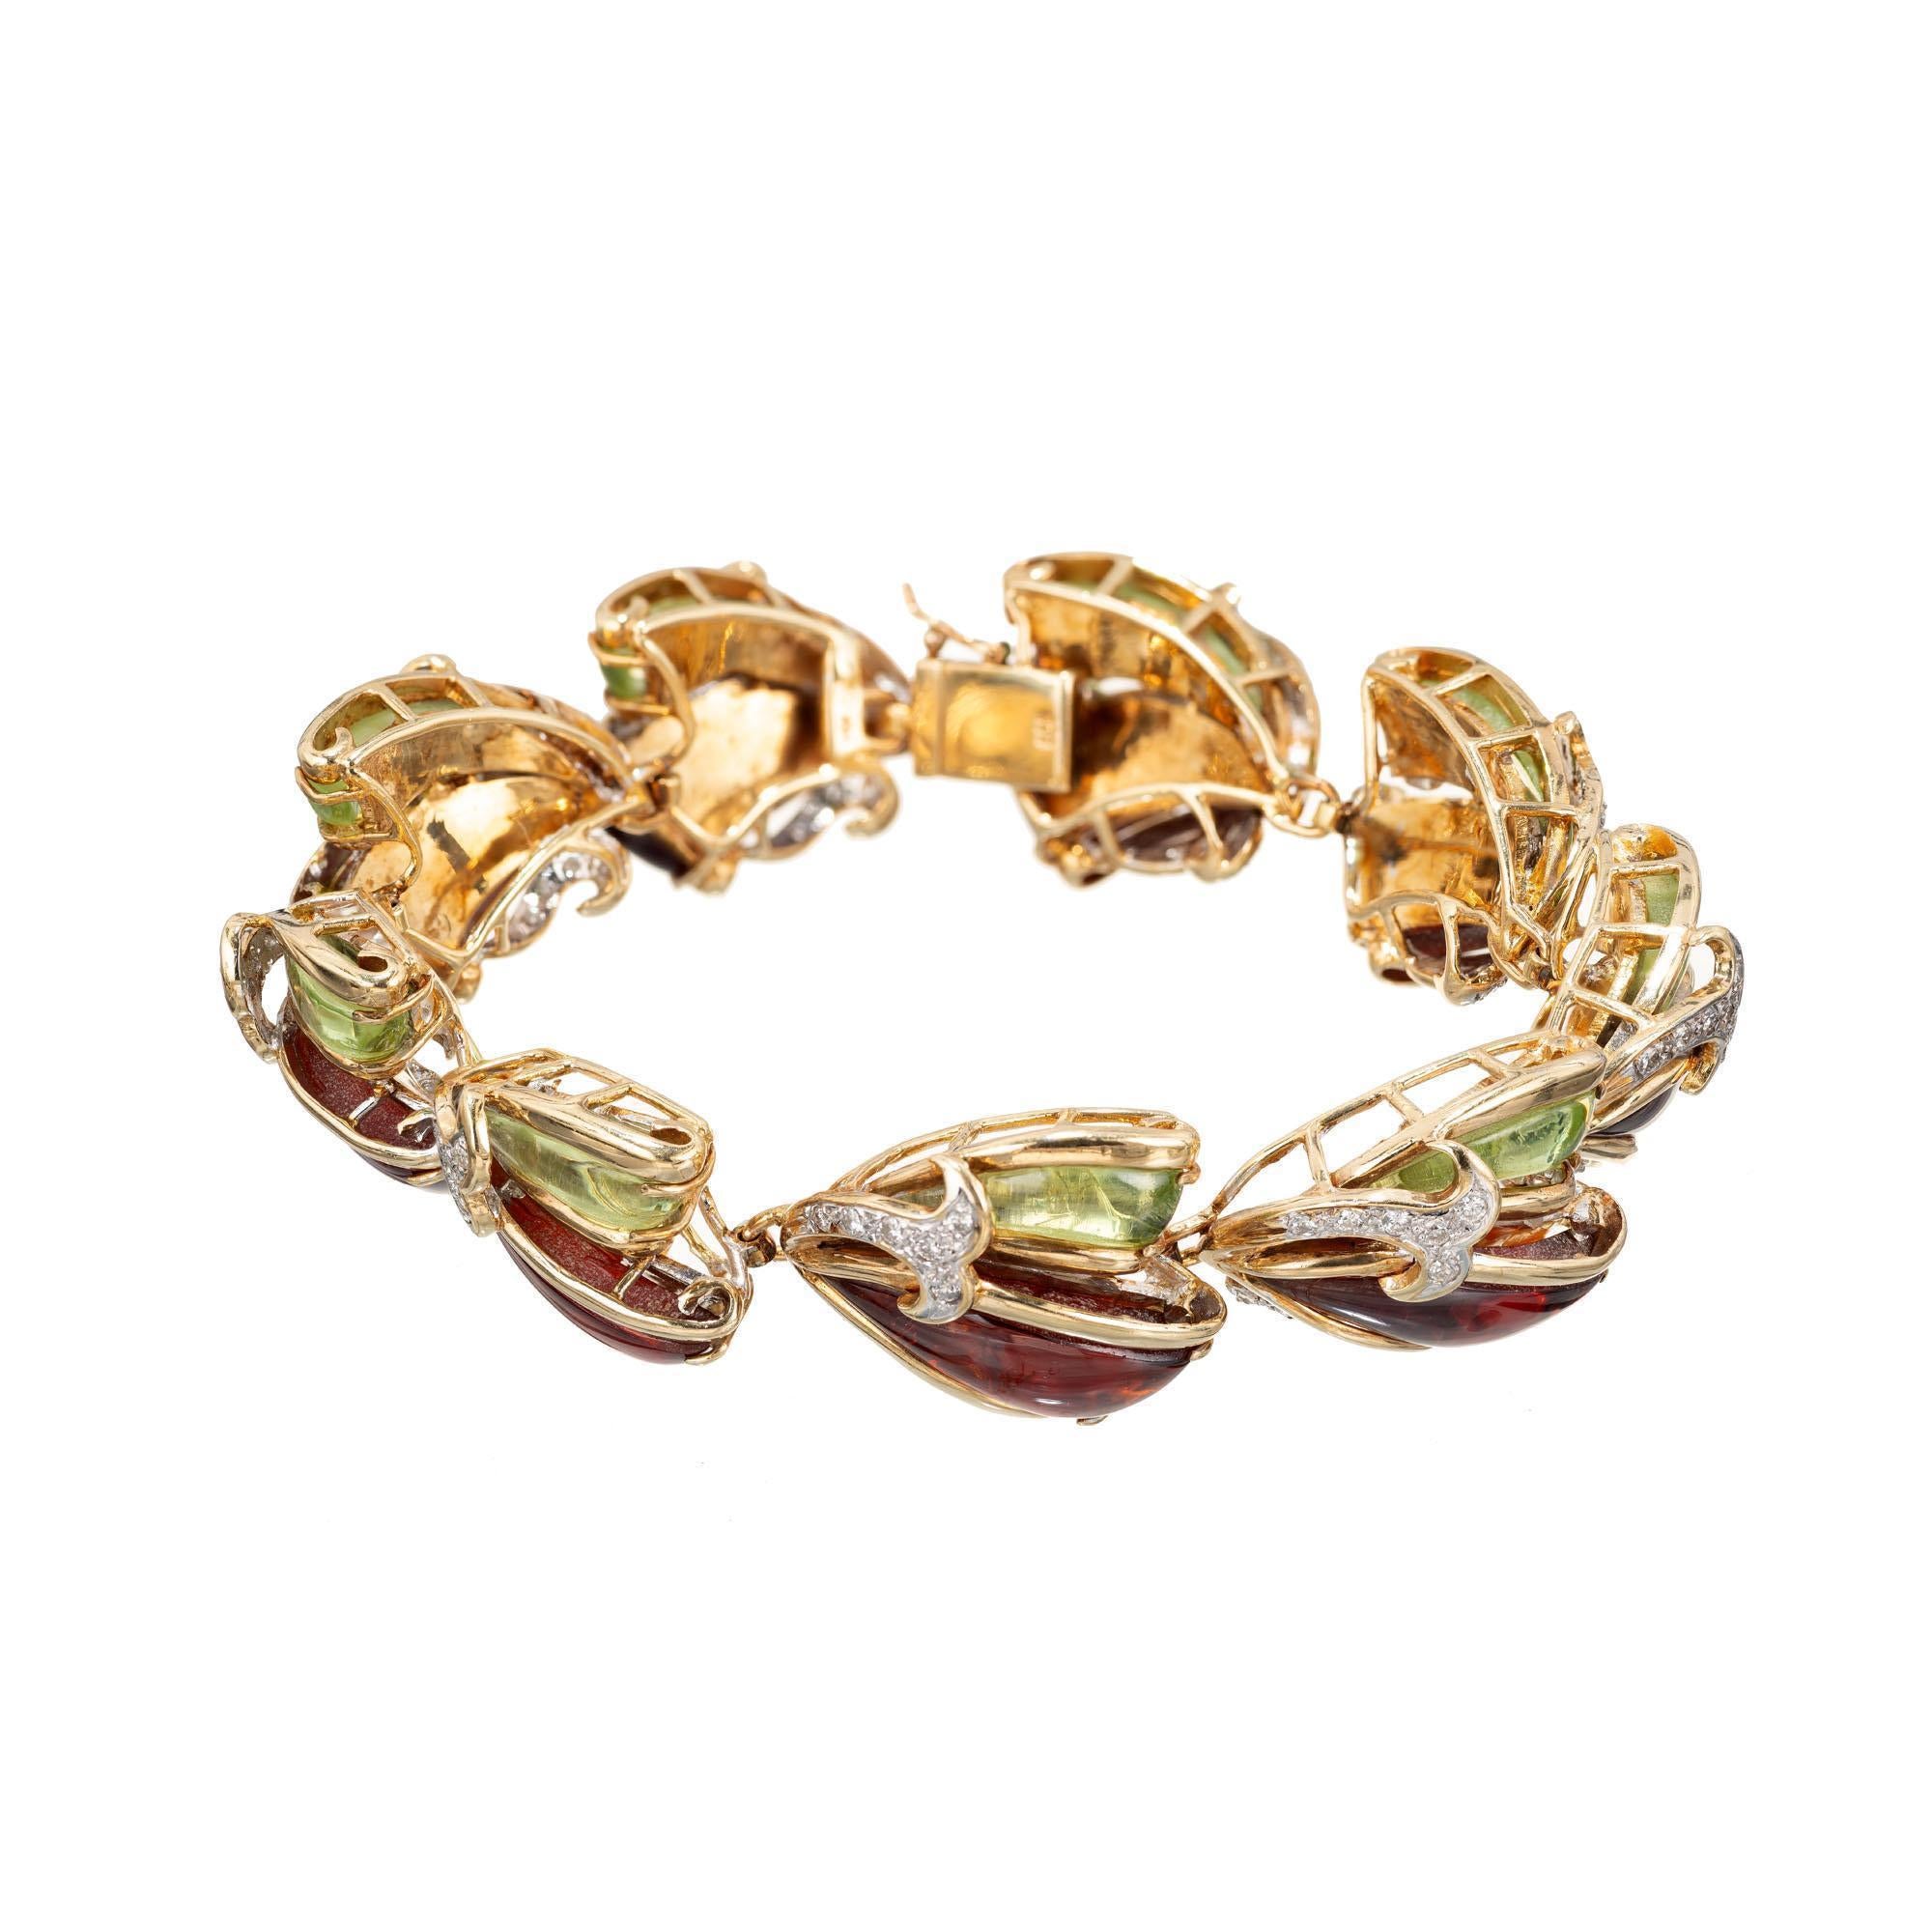 Reddish brown and green glass inlay, diamond and enamel yellow and white gold bracelet. Pave set full cut diamonds. The enamel is thick and translucent, 3mm plus. 

54 round diamonds total weight .75cts. 
Red and green enamel. 
7.75 inches.
Stamped